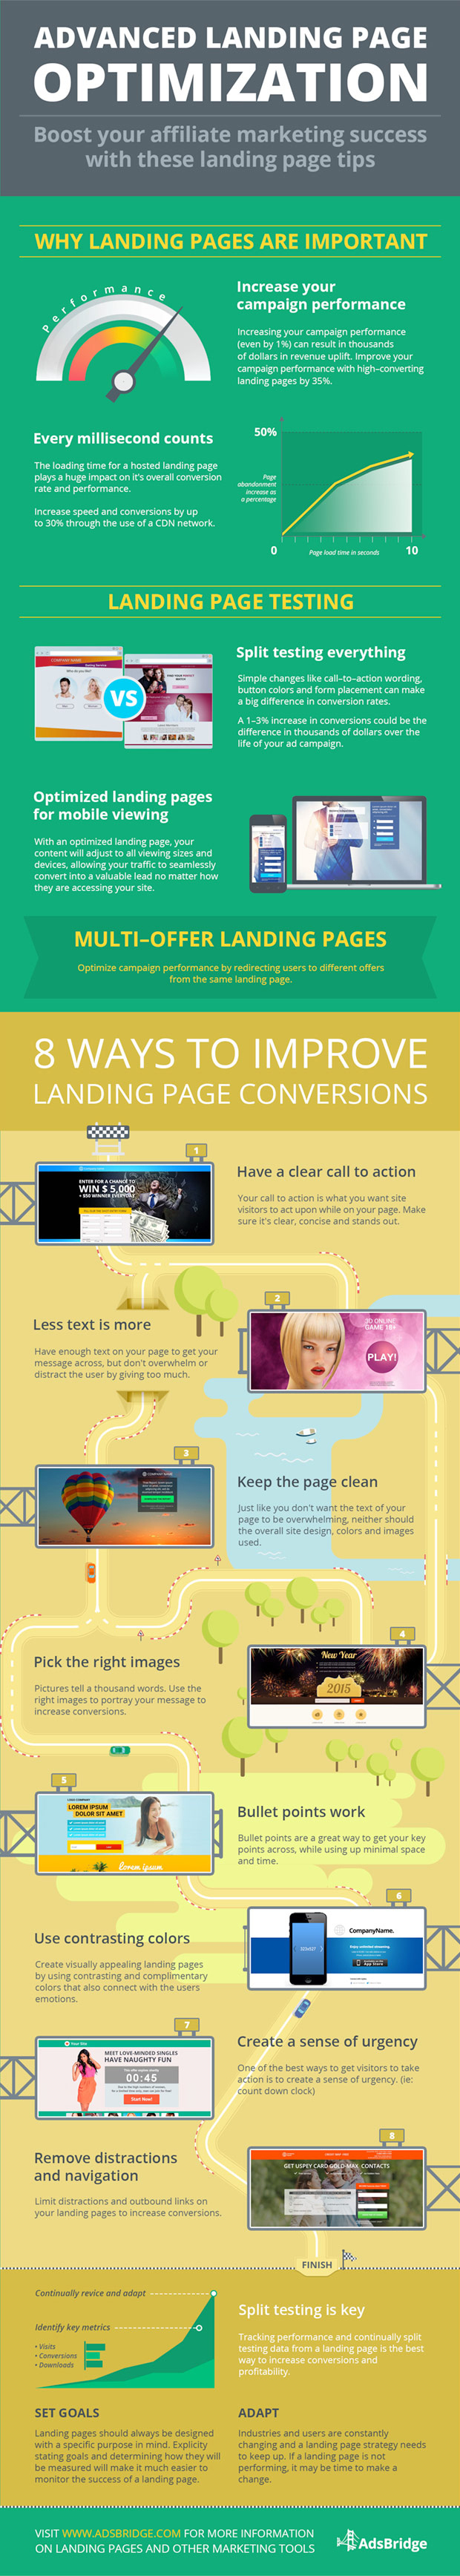 landing page optimization to improve conversions